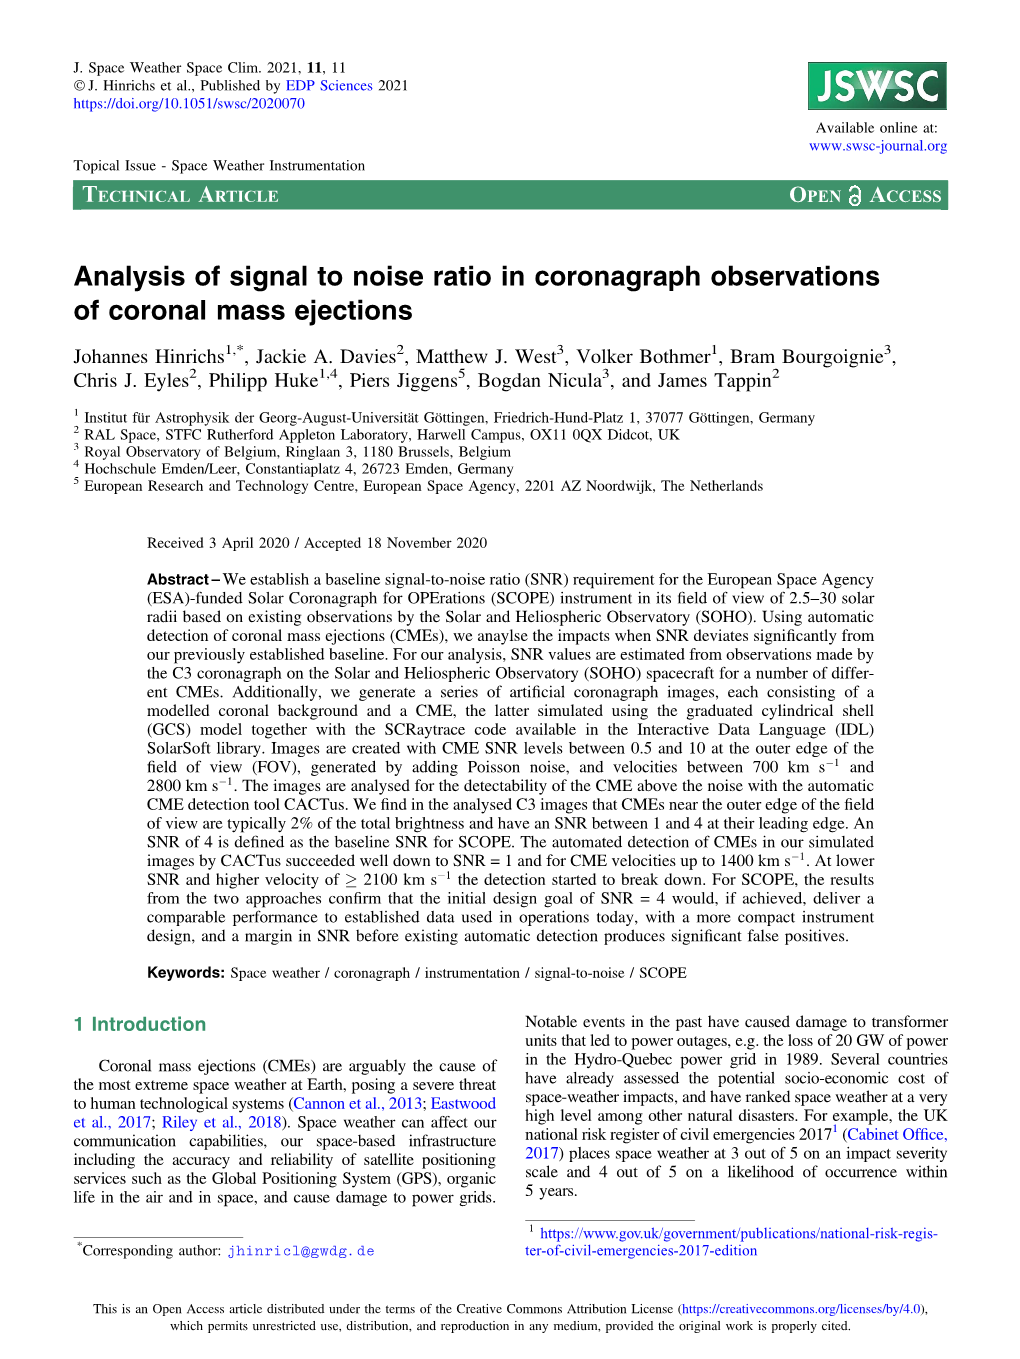 Analysis of Signal to Noise Ratio in Coronagraph Observations of Coronal Mass Ejections